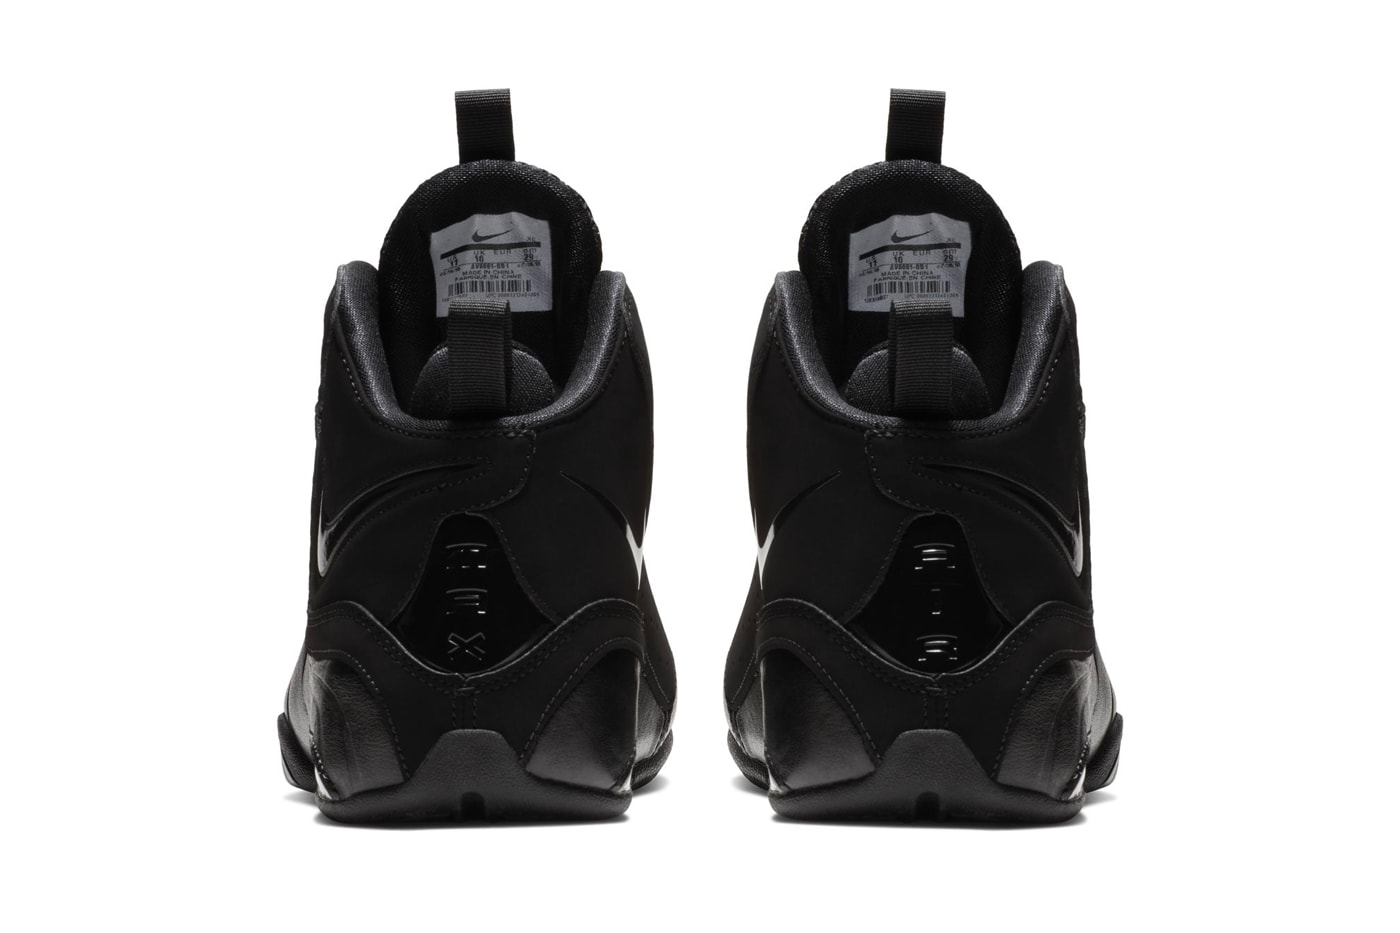 Nike Air Max Wavy "Triple Black" gold navy First Look new sneaker colorway model release date info price